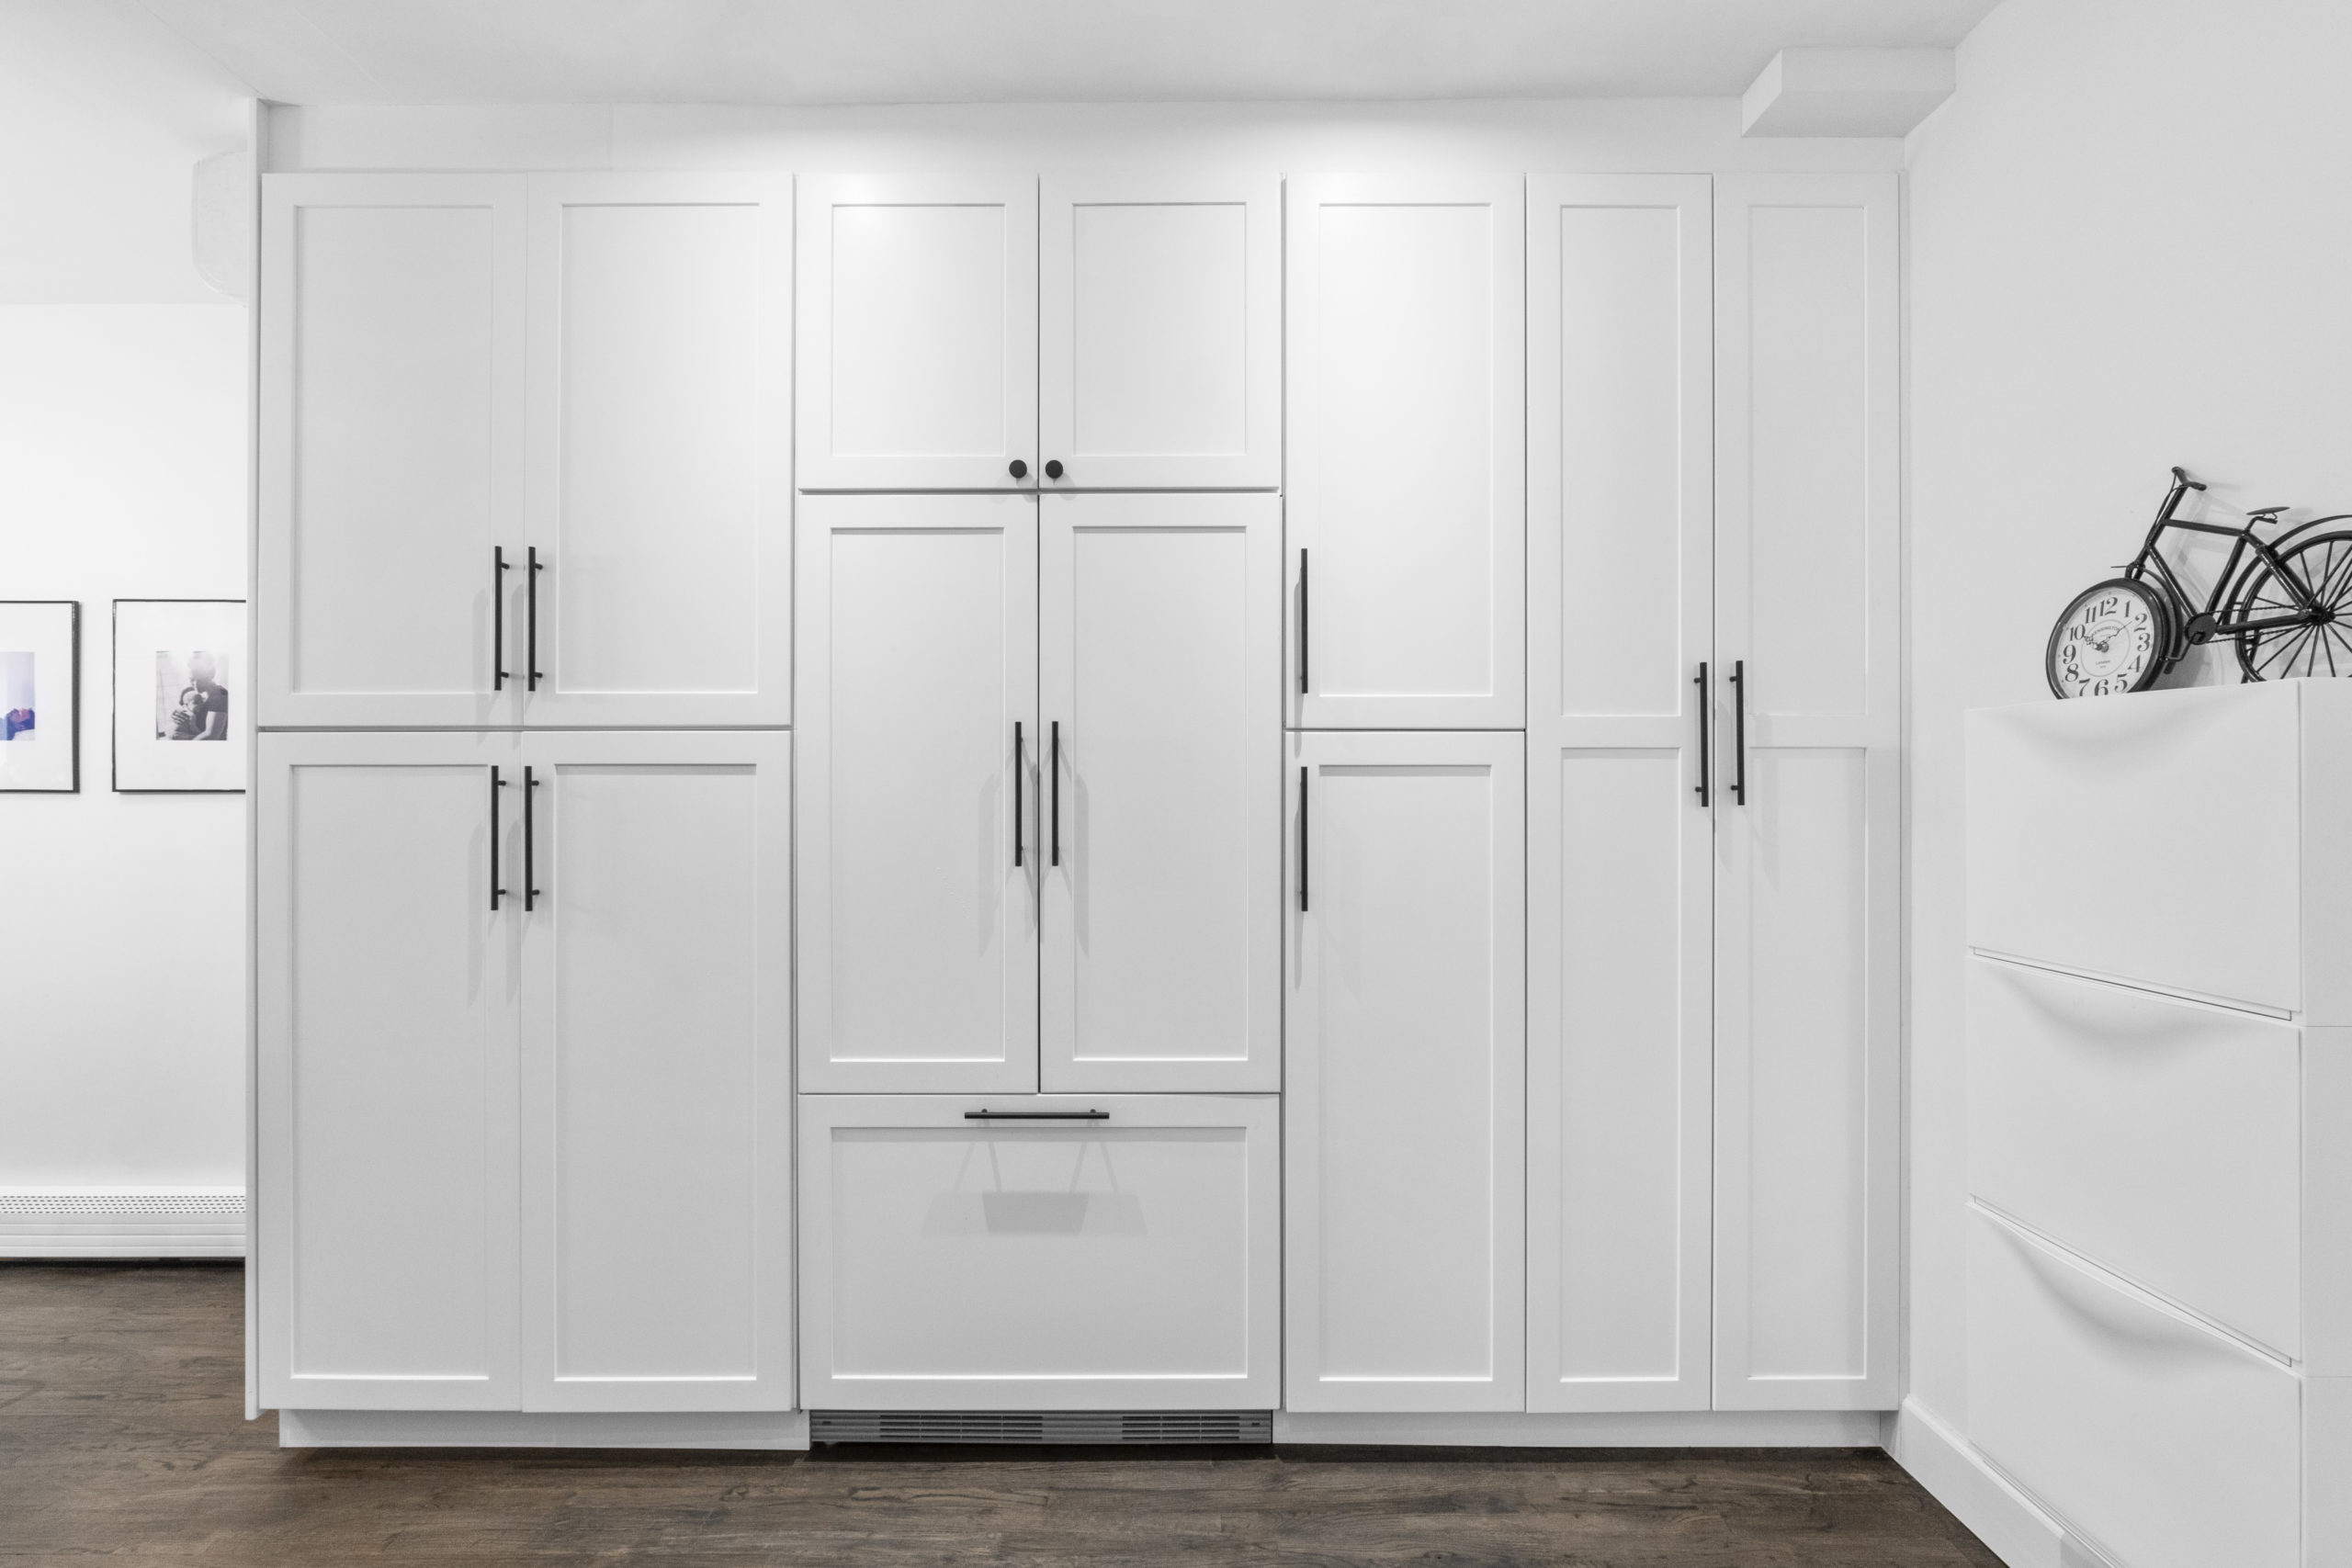 7 Full Wall Kitchen Cabinets An, Built In Pantry Cabinets For Kitchen